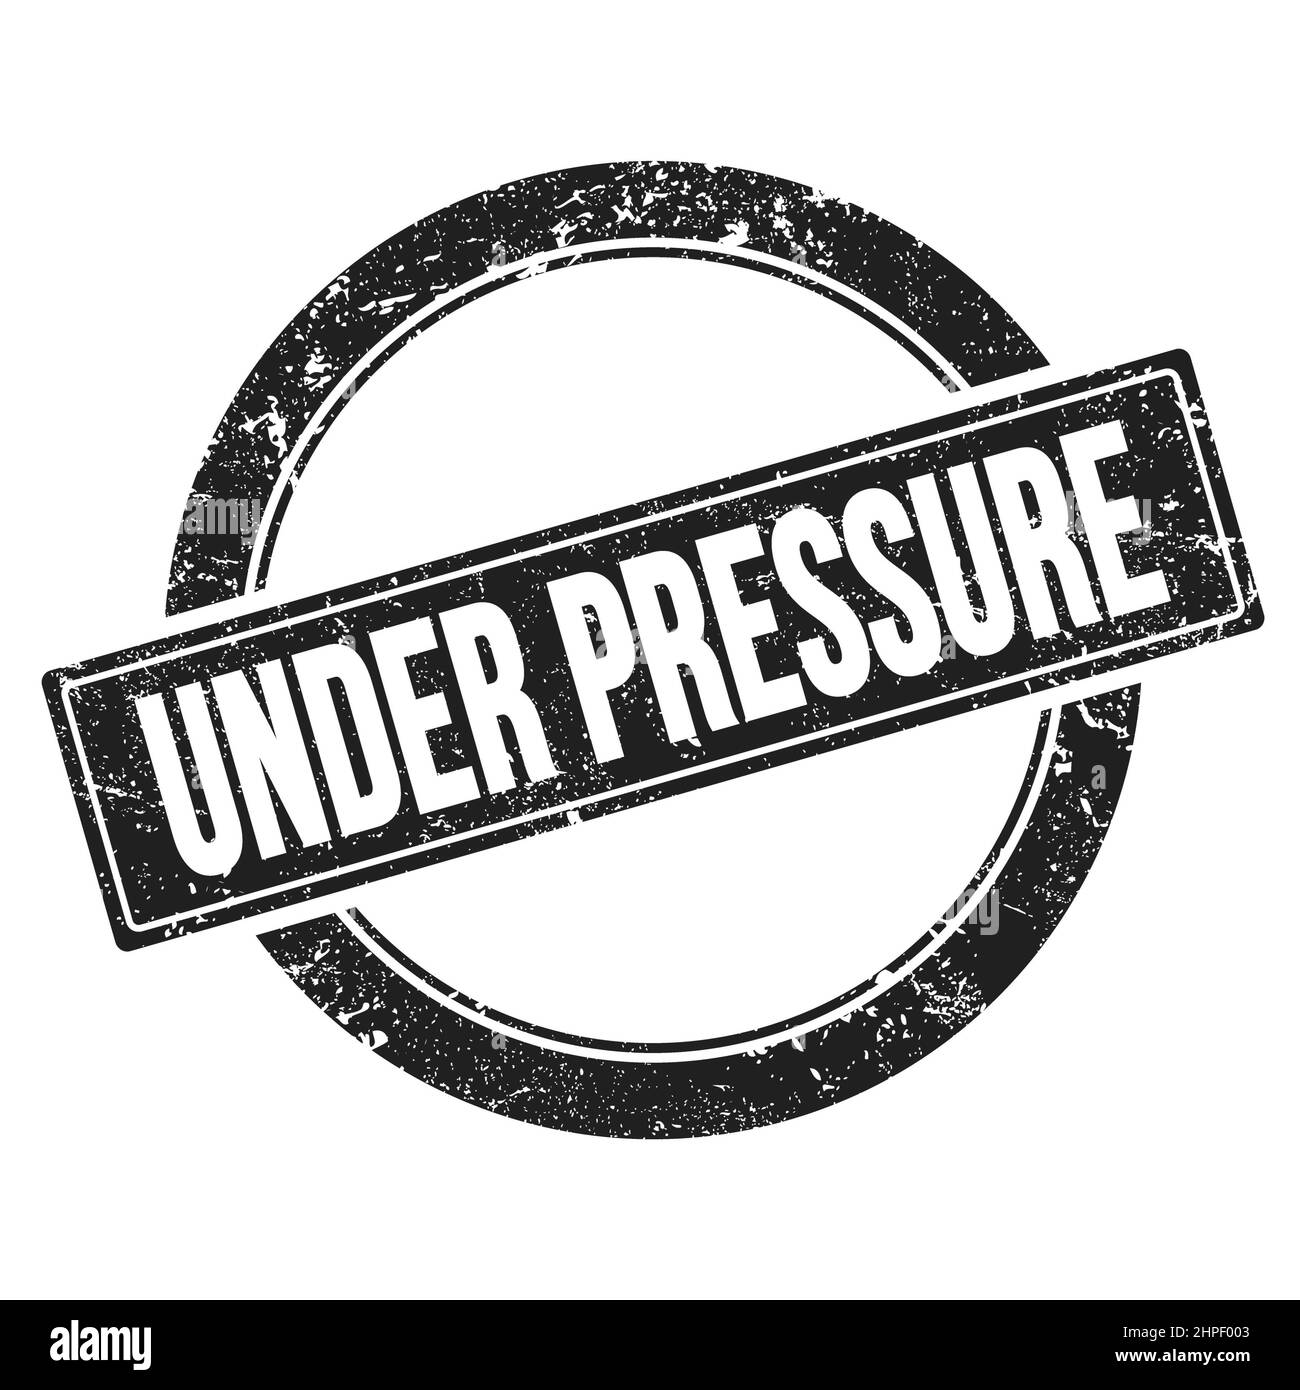 Under pressure stamp Black and White Stock Photos & Images - Alamy